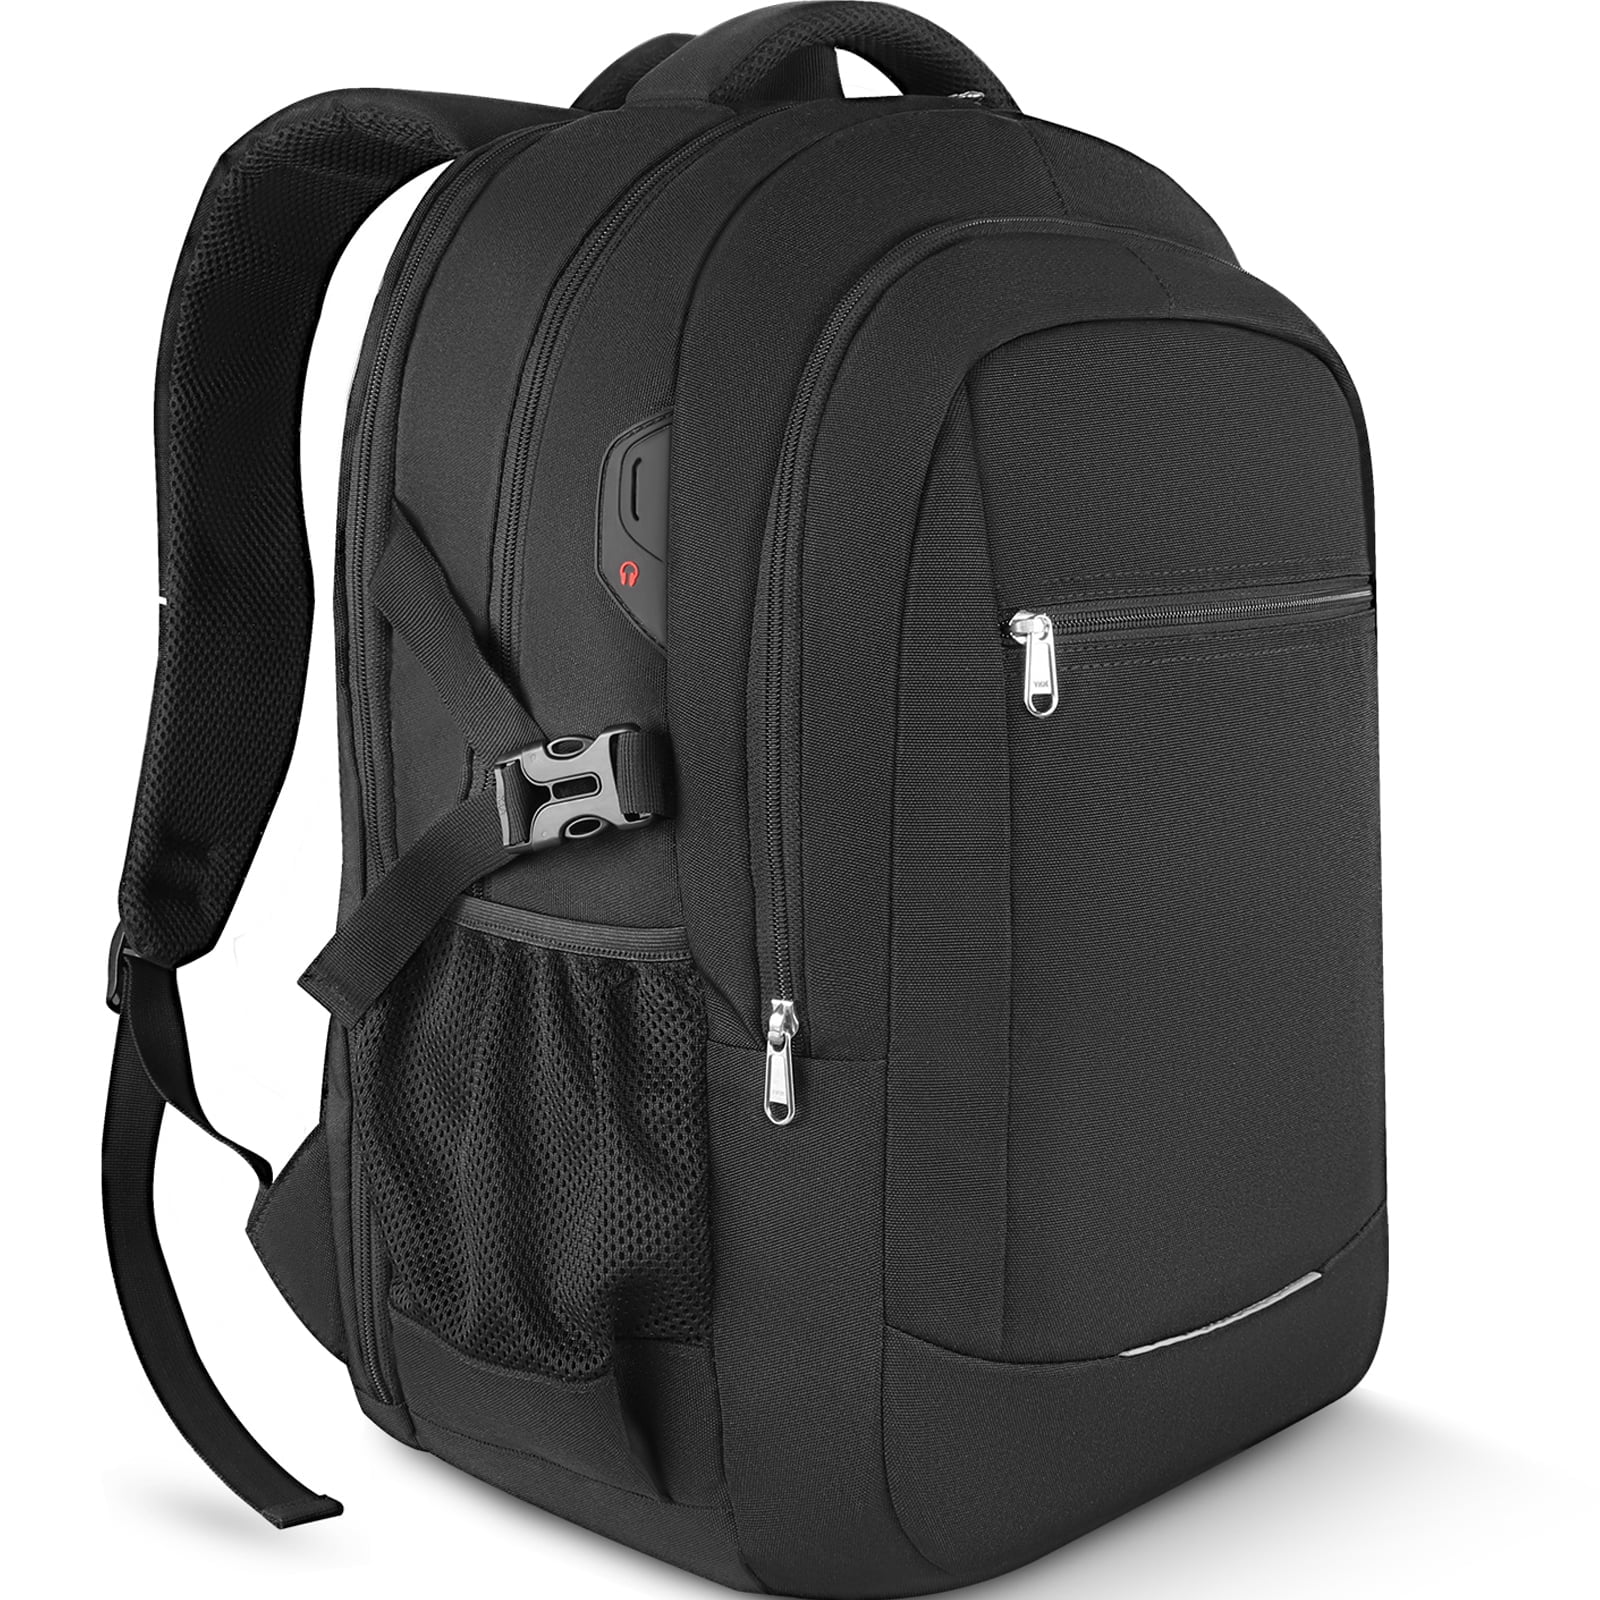 Laptop Backpack with Anti-Theft Ring.17.3 Notebook Laptop Backpack with USB Port,Waterproof Knapsack for Travel Daypack - Walmart.com